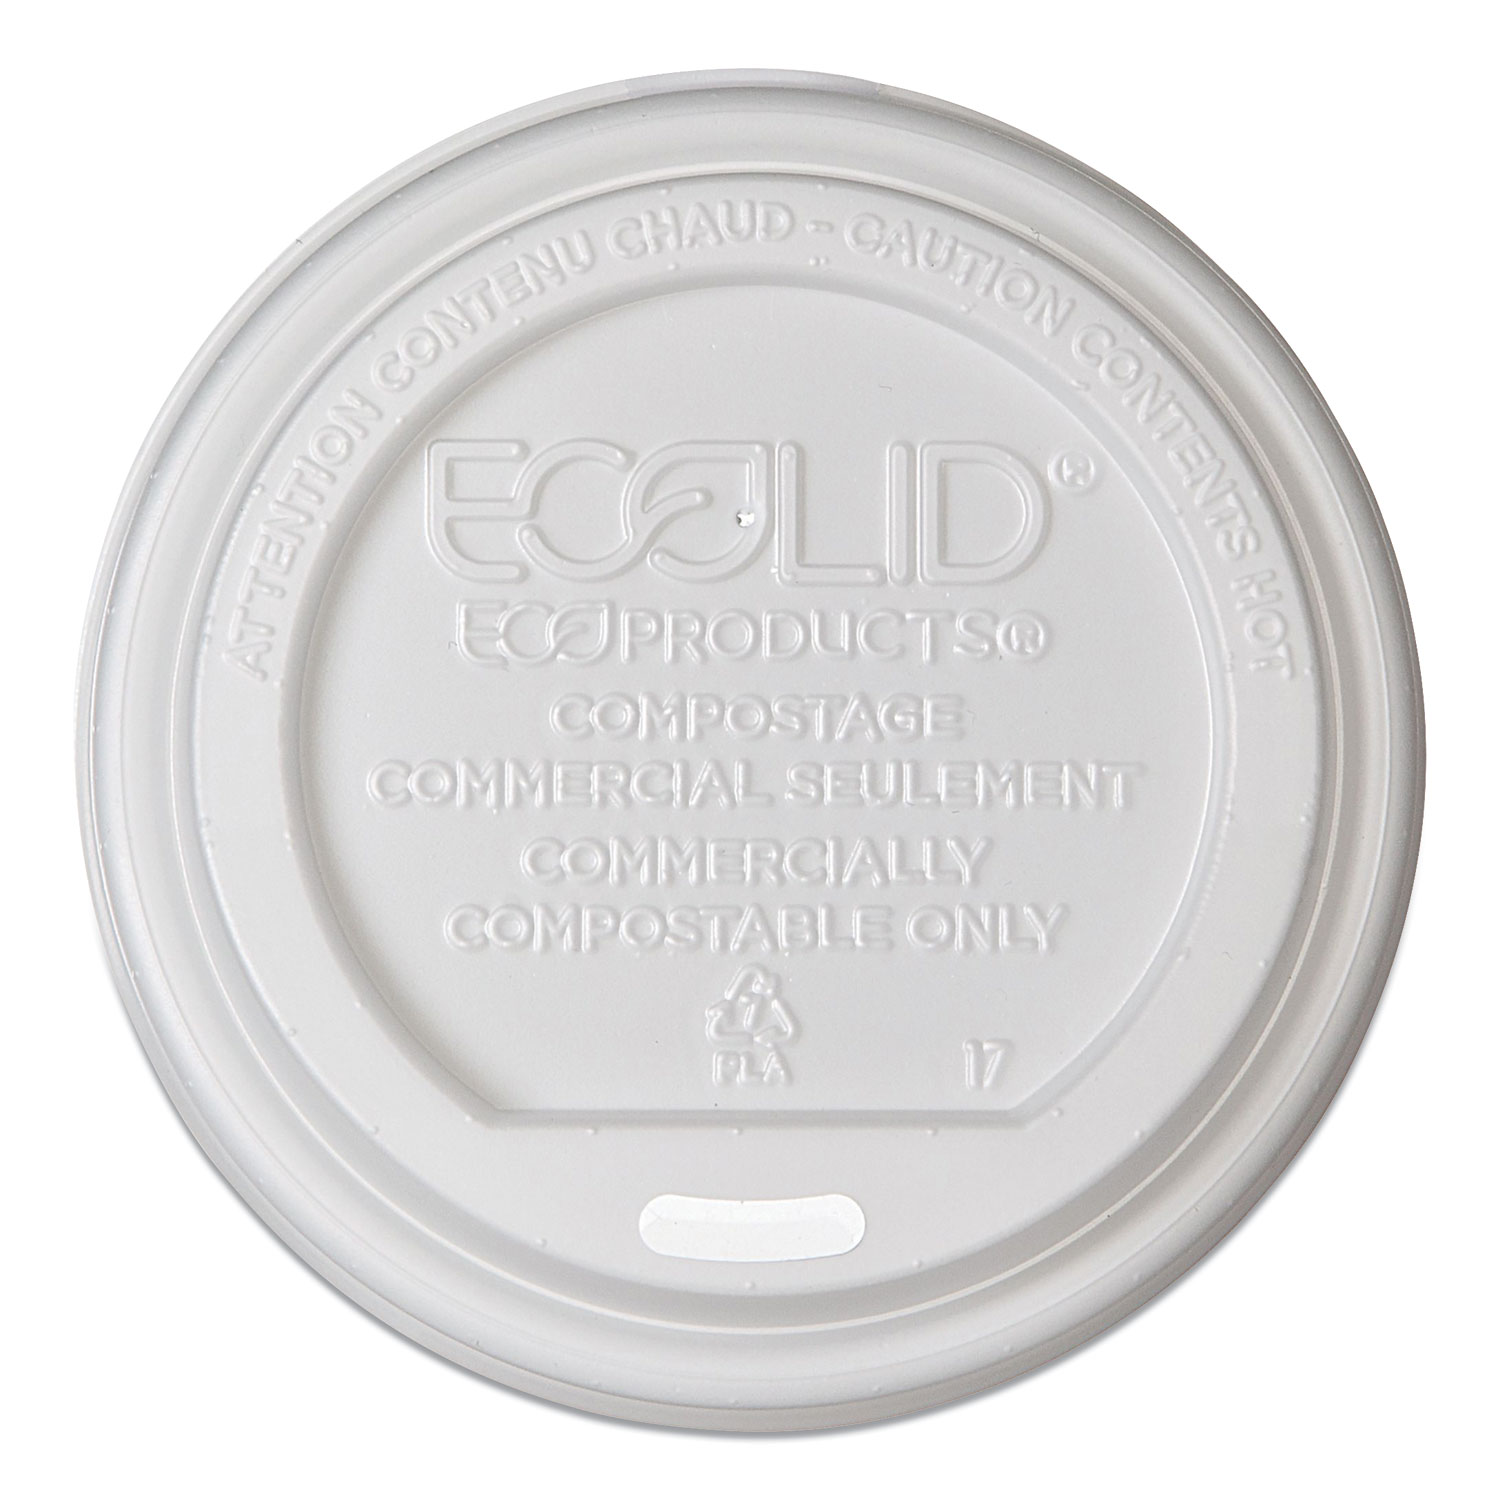  Eco-Products EP-ECOLID-W EcoLid Renewable/Compostable Hot Cup Lid, PLA, Fits 10-20 oz Hot Cups, 50/Pack, 16 Packs/Carton (ECOEPECOLIDW) 